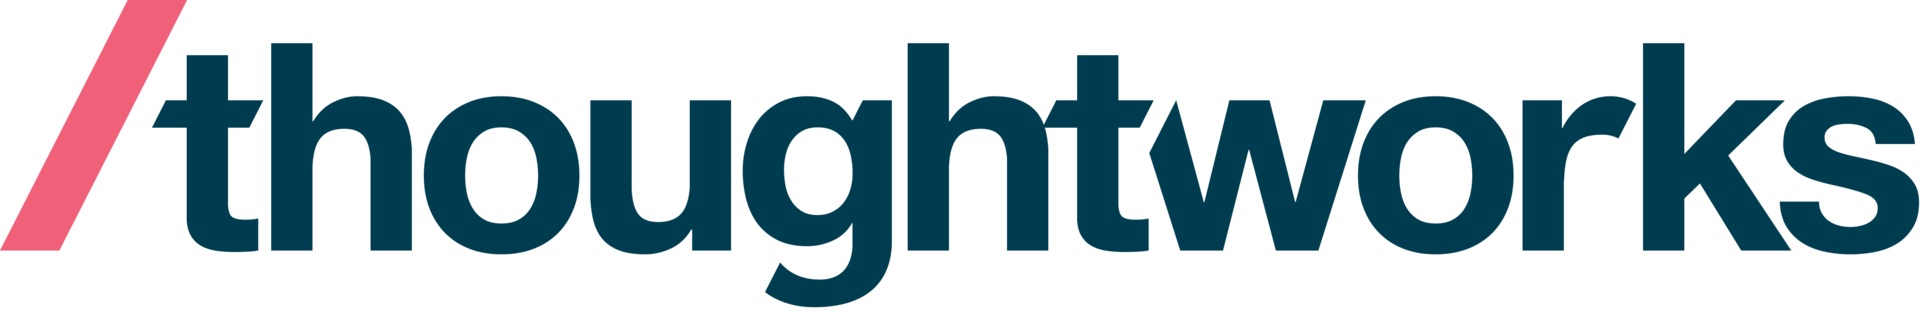 Thoughtworks Holding, Inc.